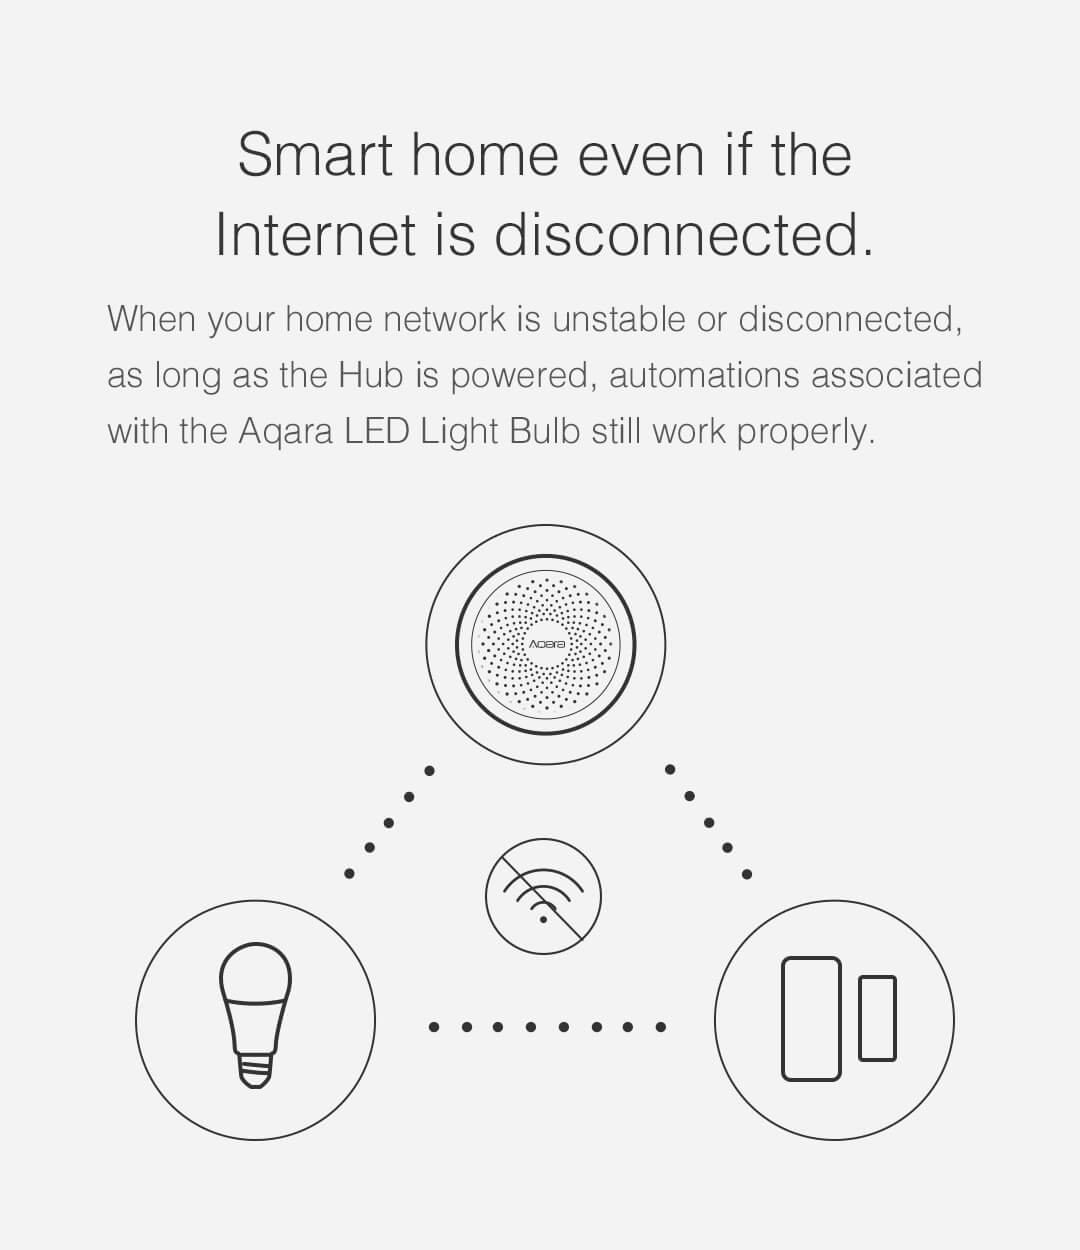 Our smart led light bulb can still work even if the wifi is disconnected